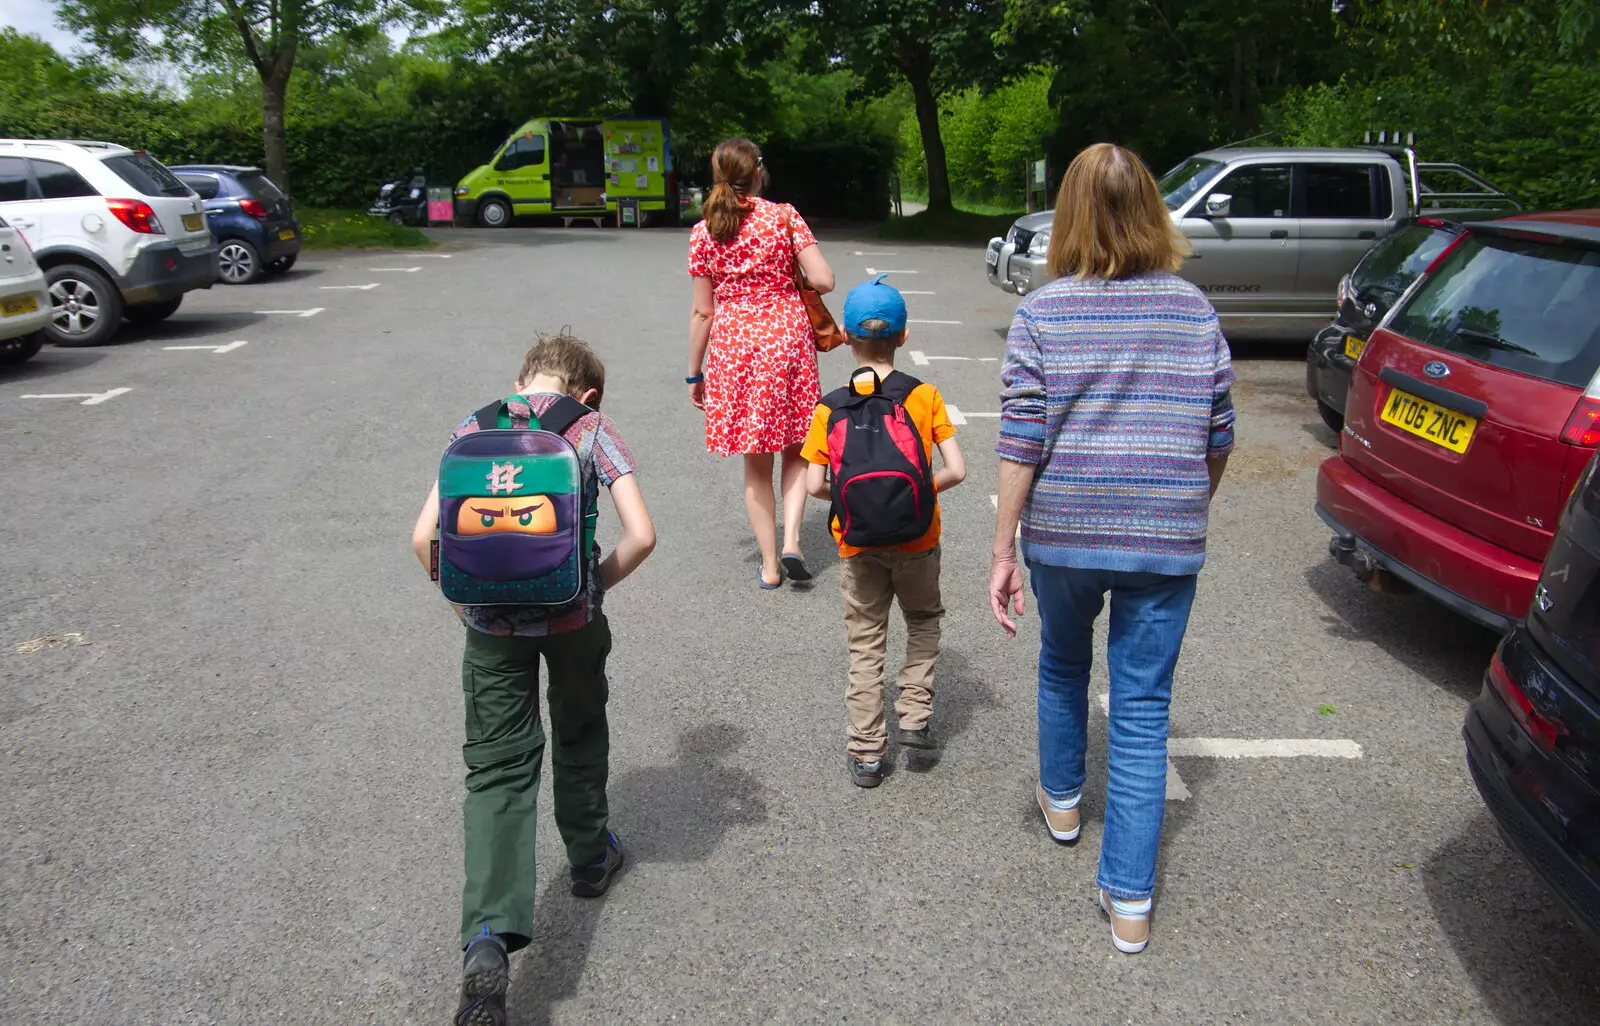 We arrive at the Parke car park, from Chagford Lido and a Trip to Parke, Bovey Tracey, Devon - 25th May 2019